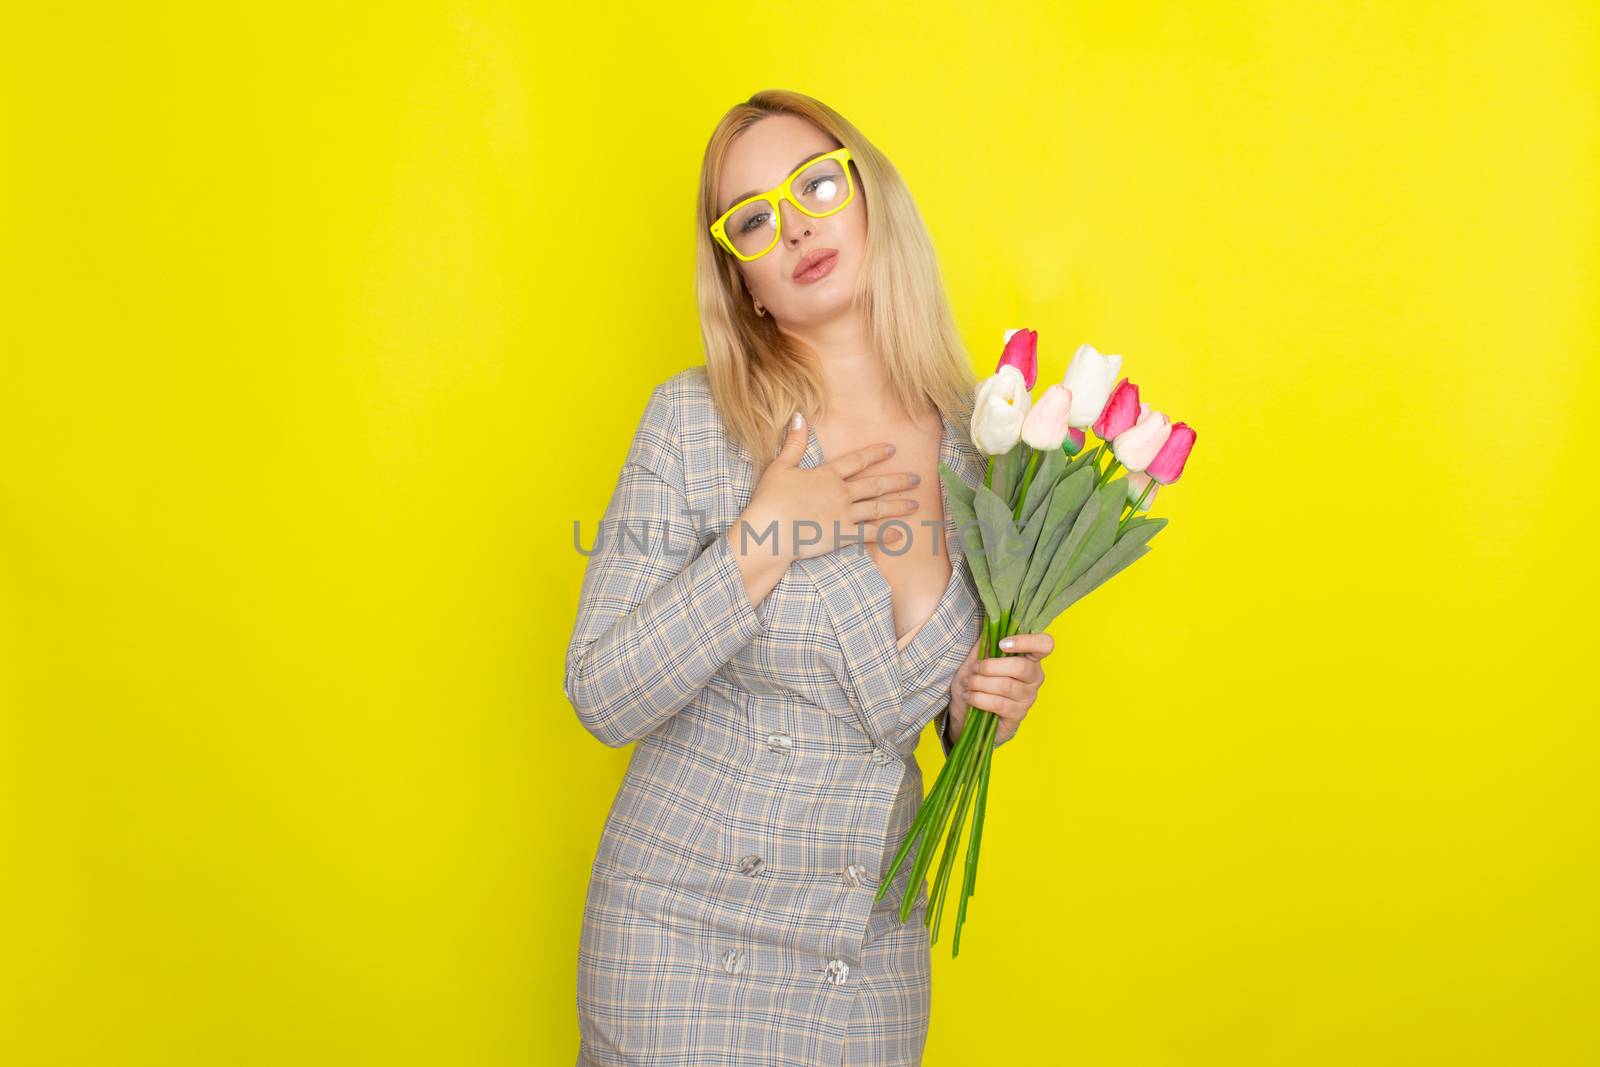 Blonde woman in plaid dress holding tulips bouquet over yellow background